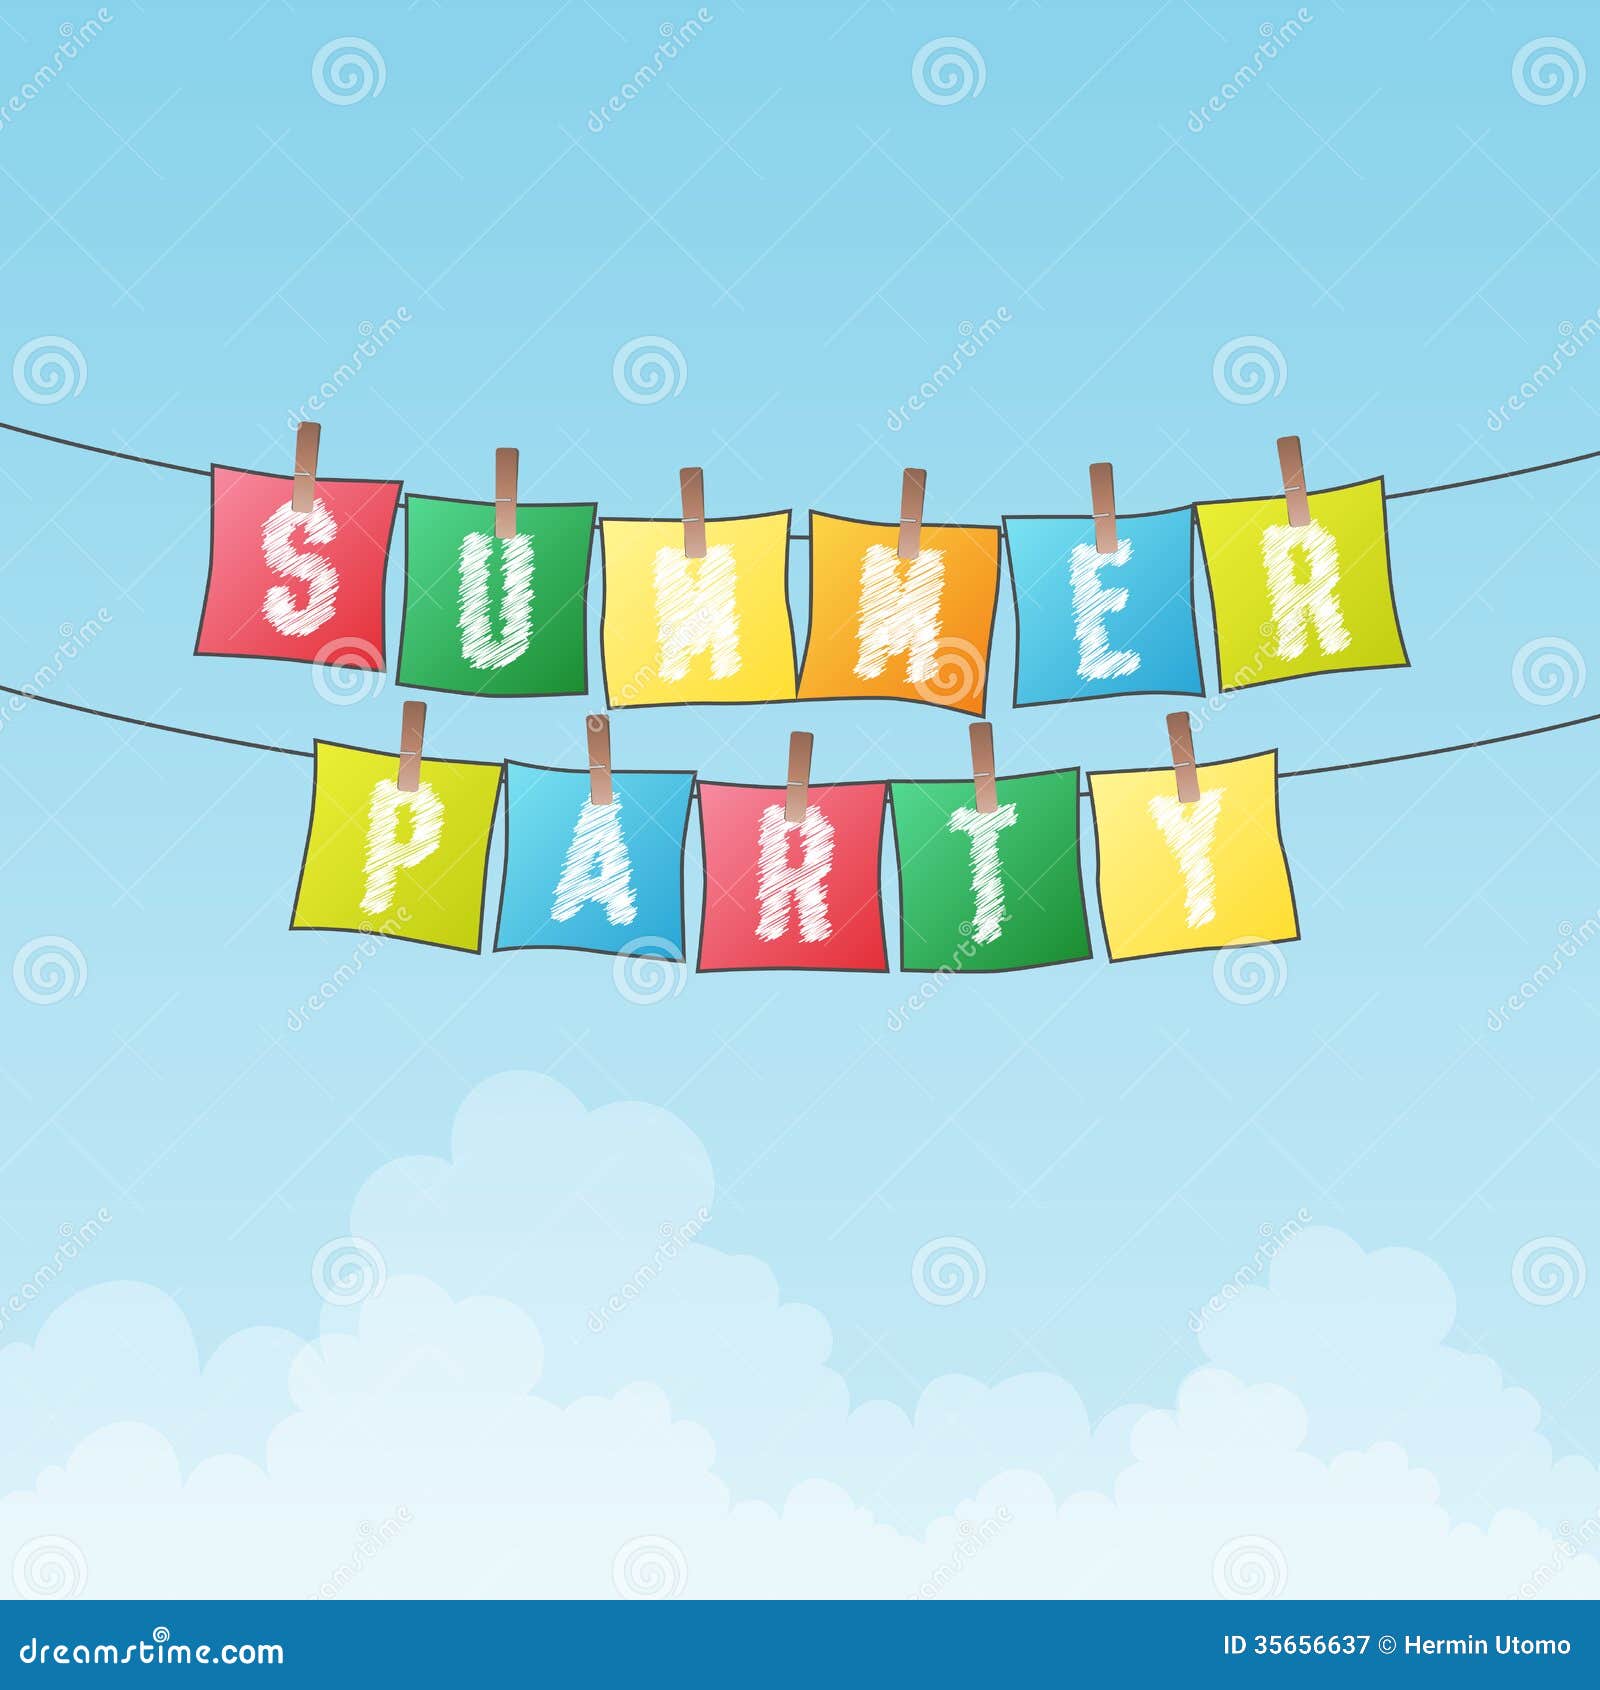 free clip art summer party - photo #5